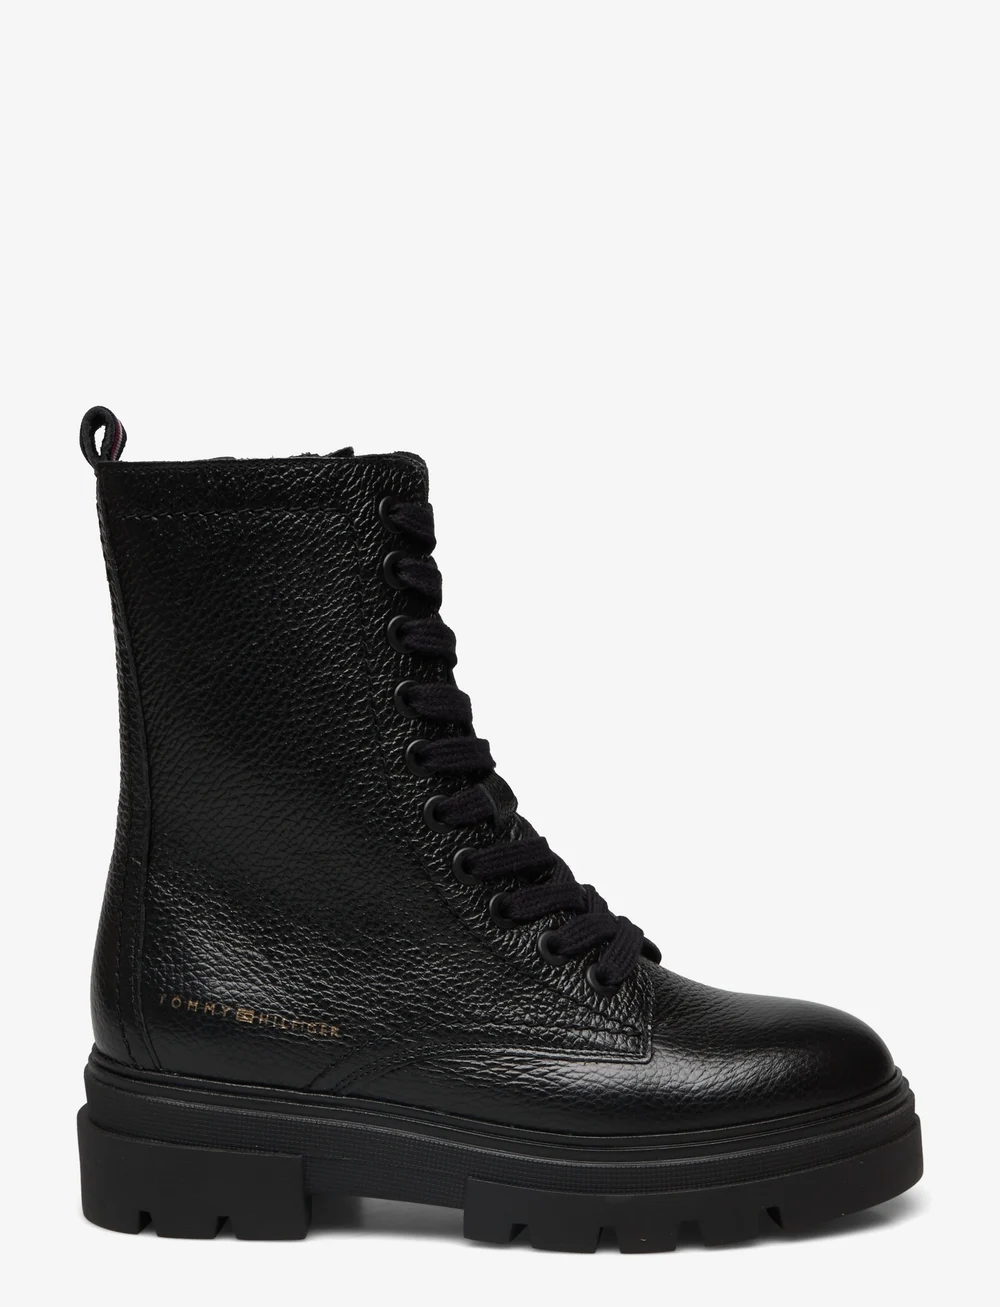 Tommy Hilfiger Monochromatic Lace Up Boot - Ankle boots | Boots